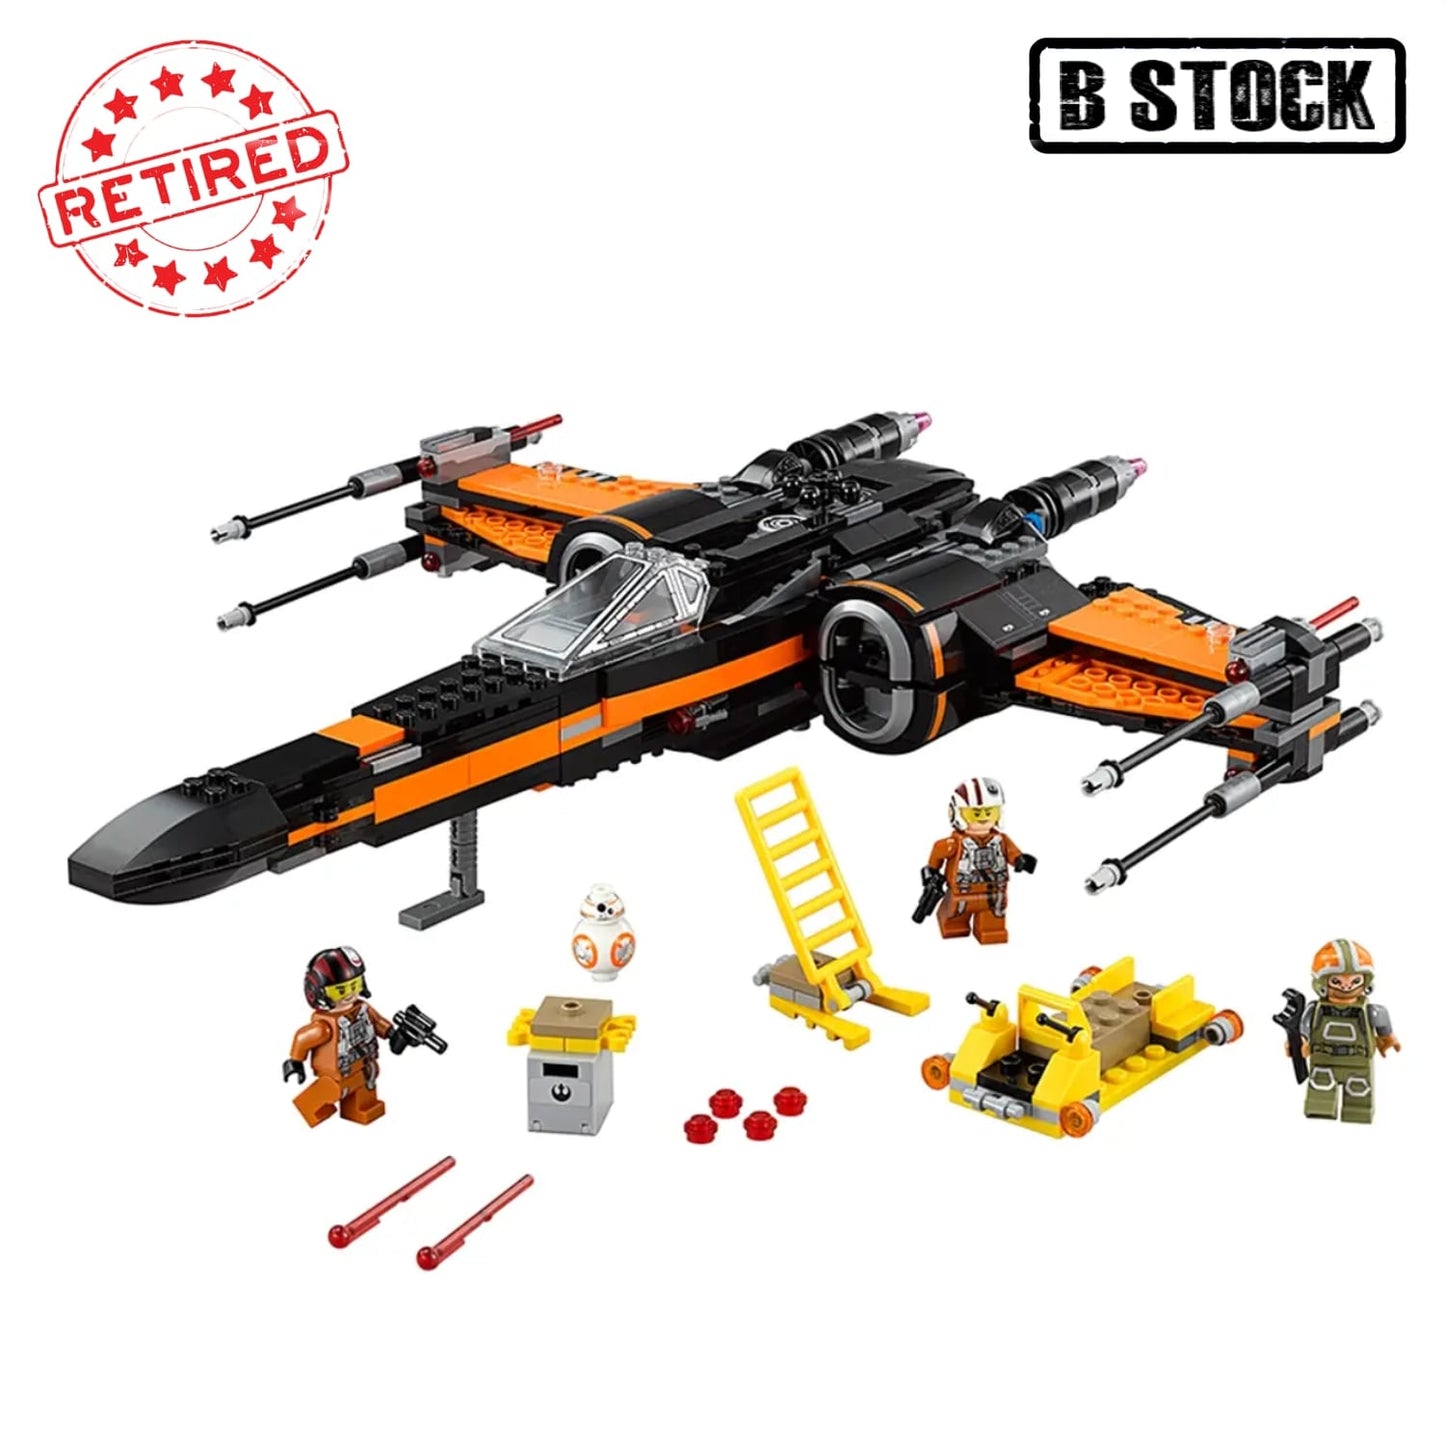 Lego 75102 Star Wars Poe's X-Wing Fighter - B Stock